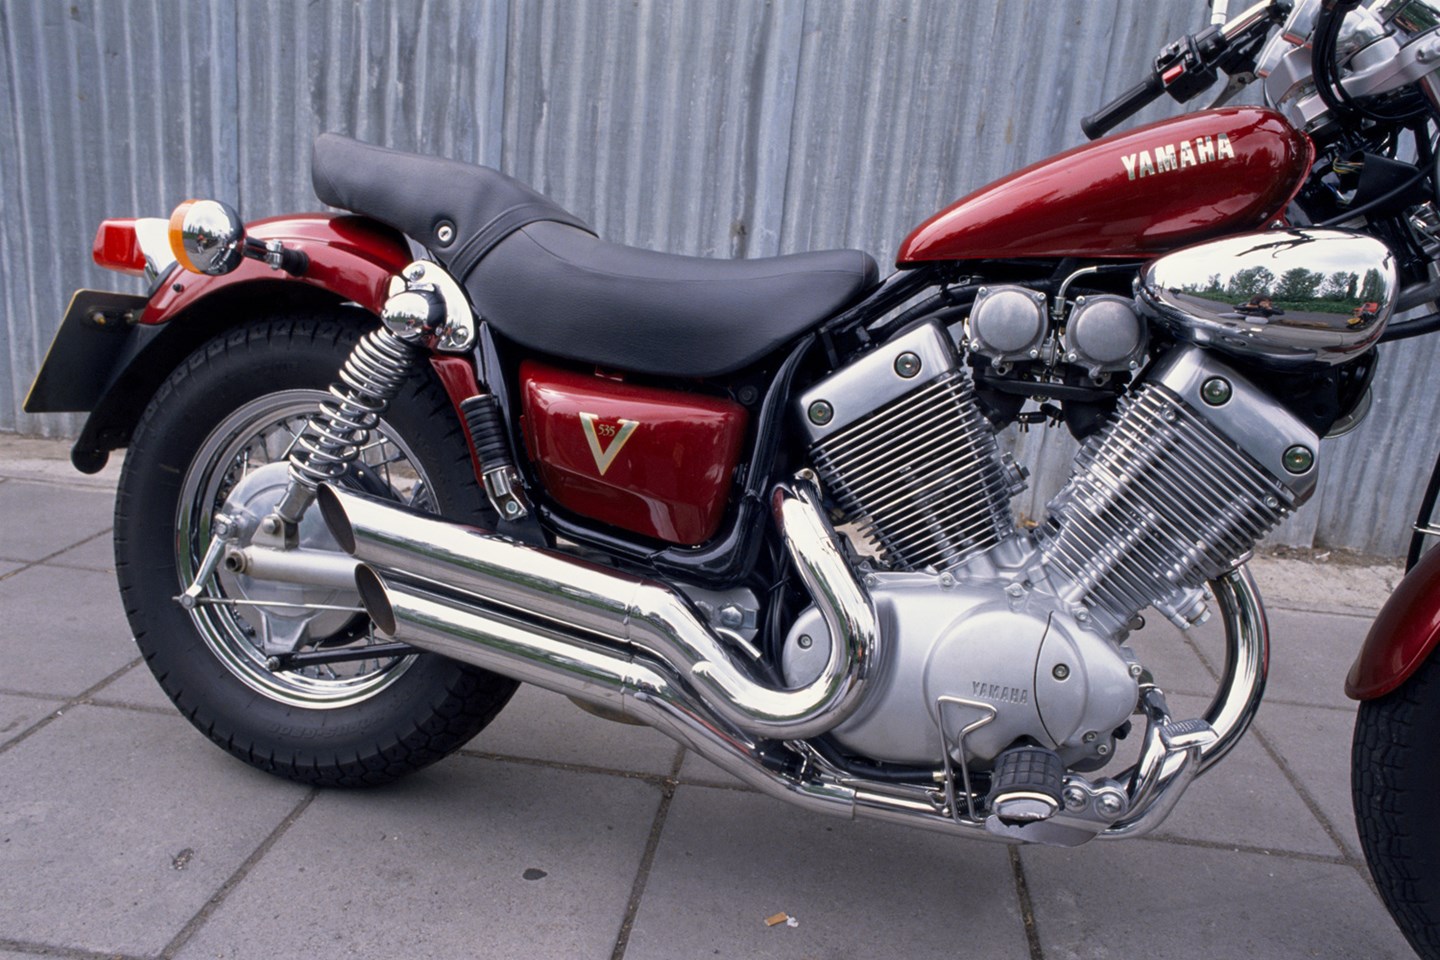 Yamaha Virago 535 (1988-2004) Specs, Prices and Guide | MCN